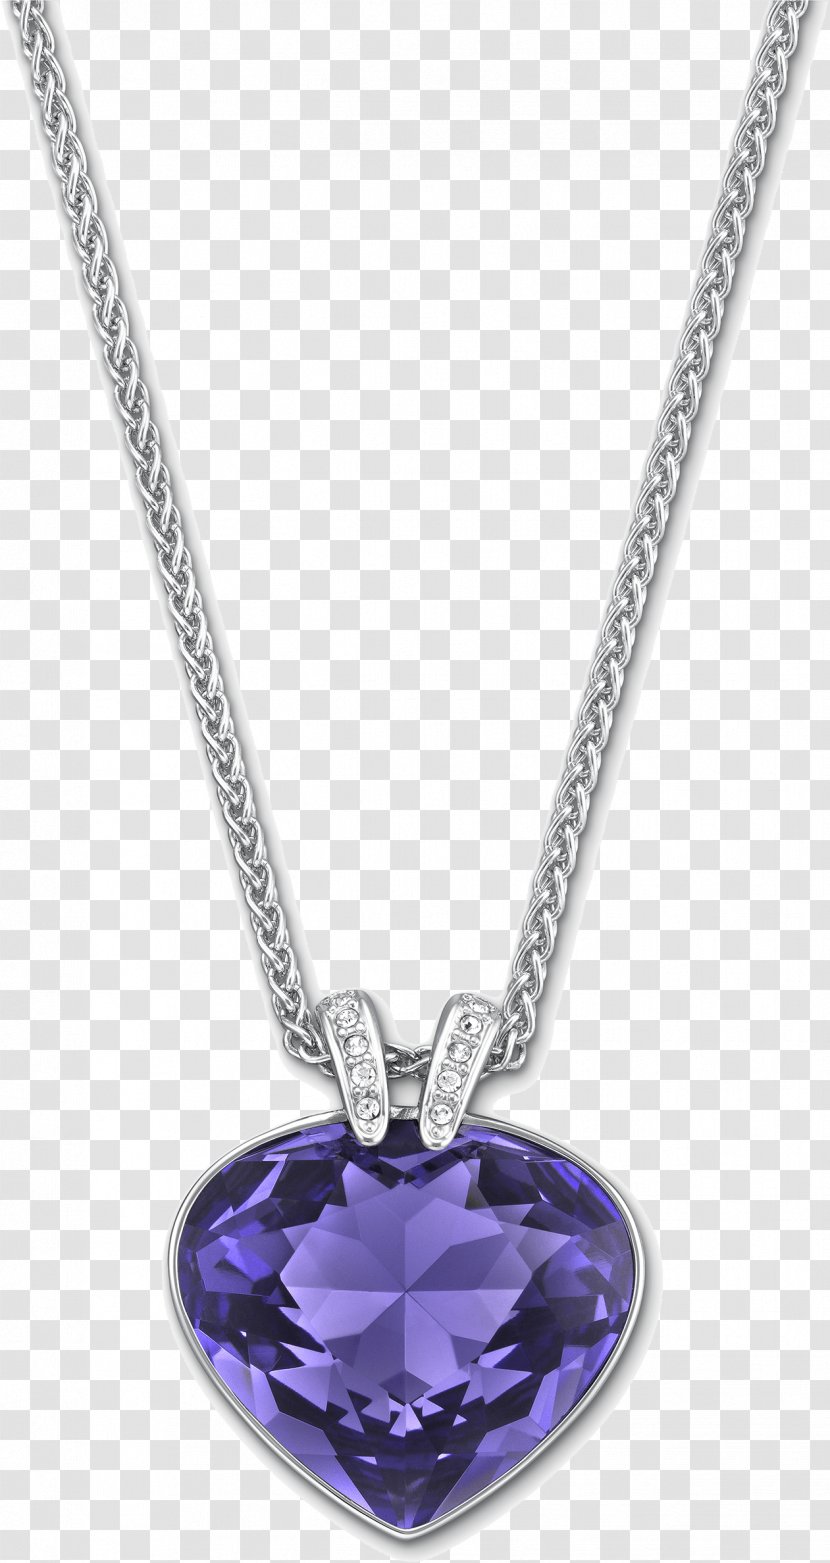 Earring Pendant Jewellery Necklace - Image Transparent PNG